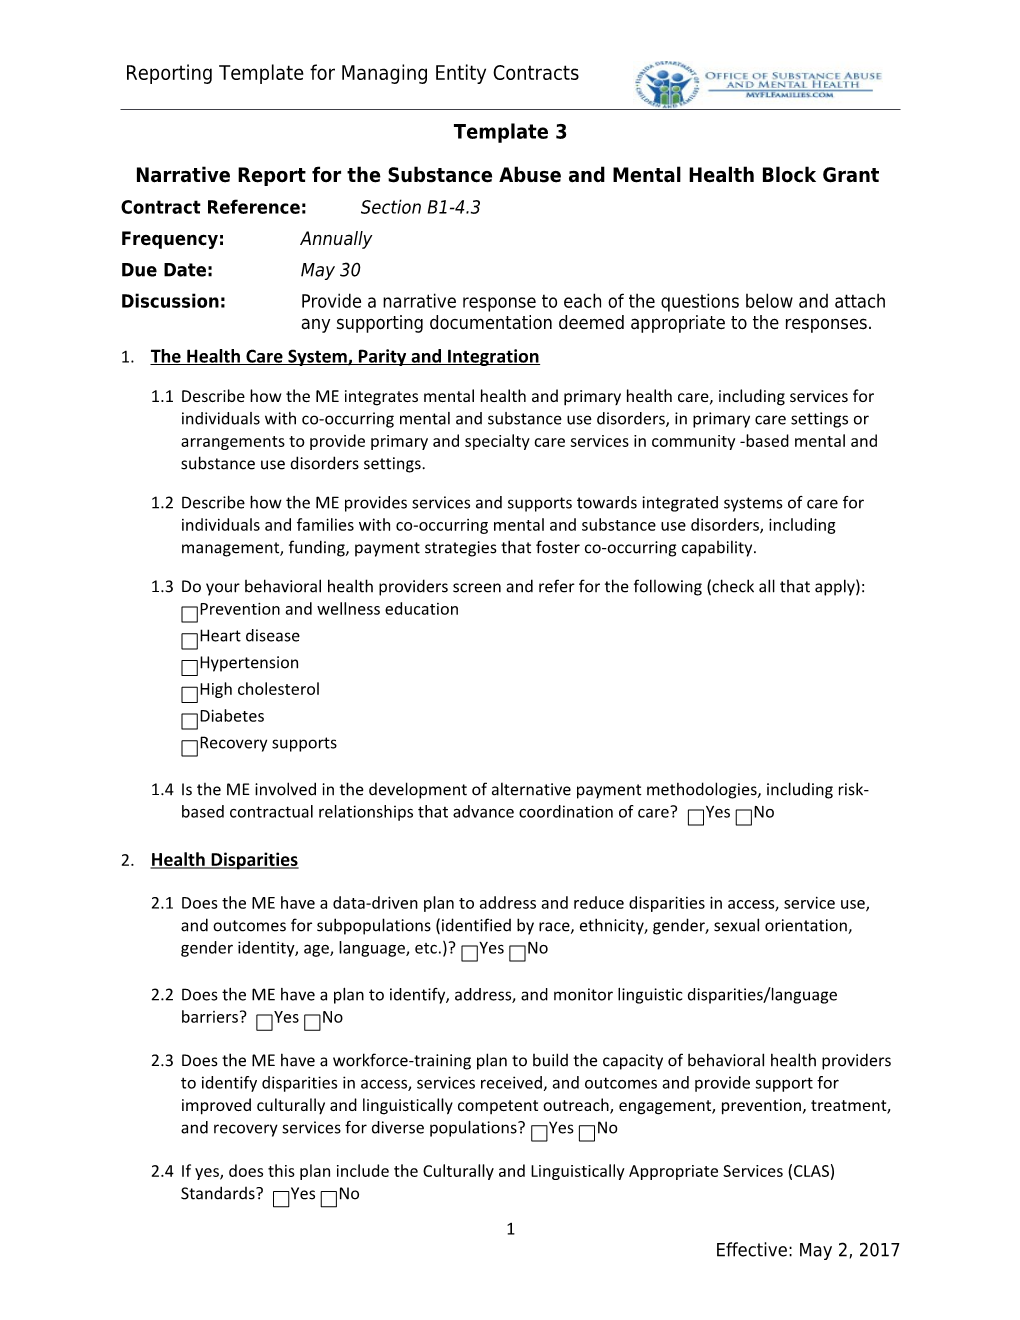 Narrative Report for the Substance Abuse and Mental Health Block Grant